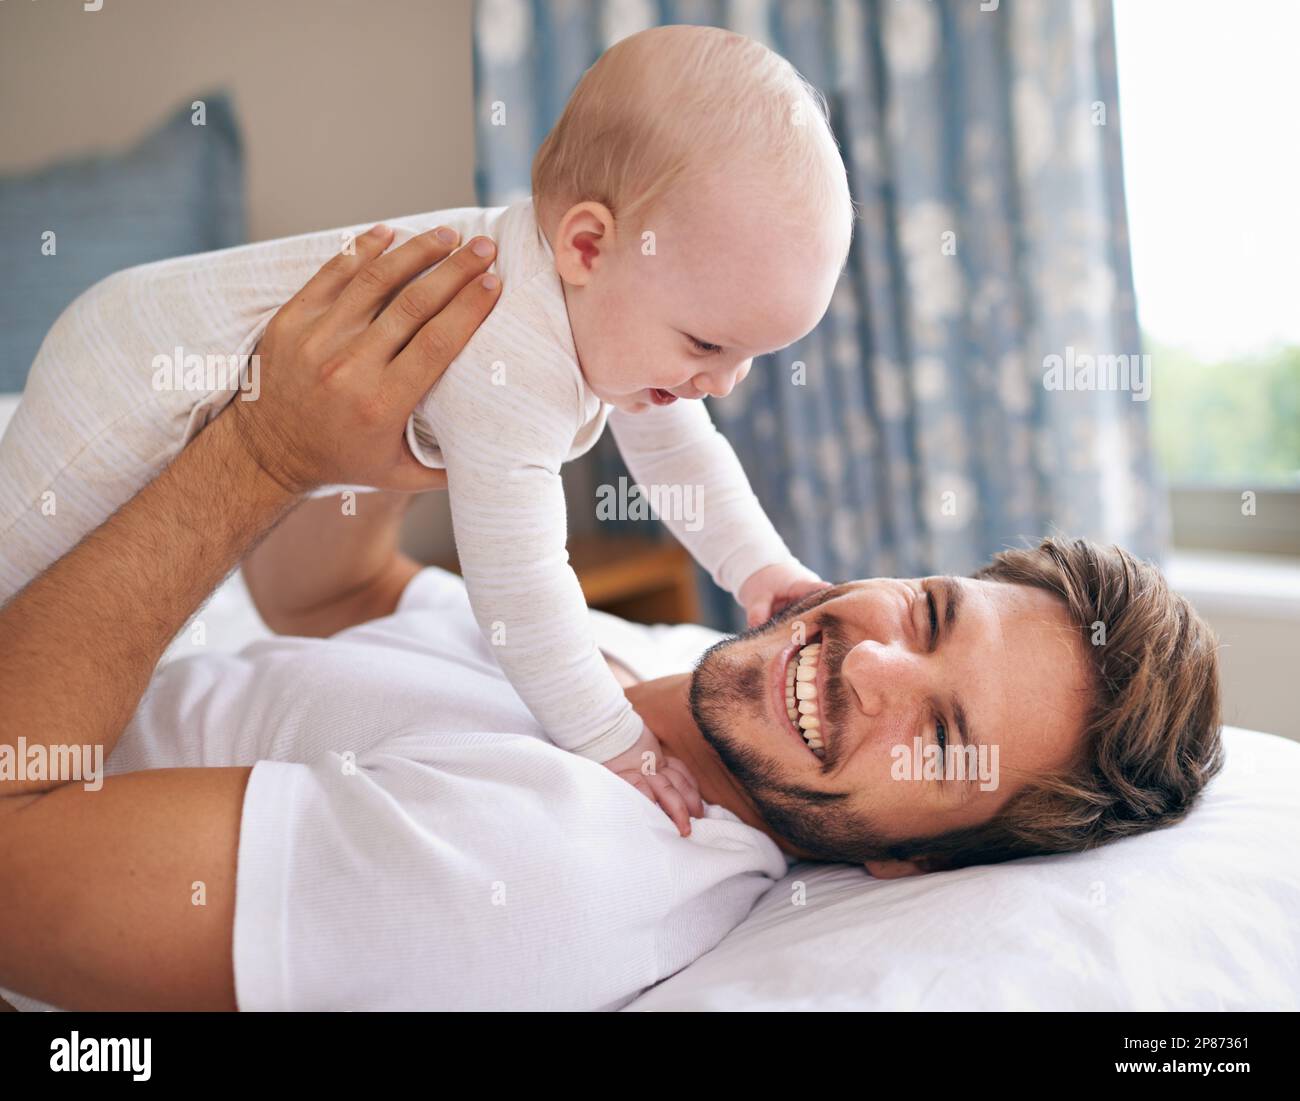 I love grabbing daddys beard. a father lying on a bed holding his baby girl up in the air. Stock Photo